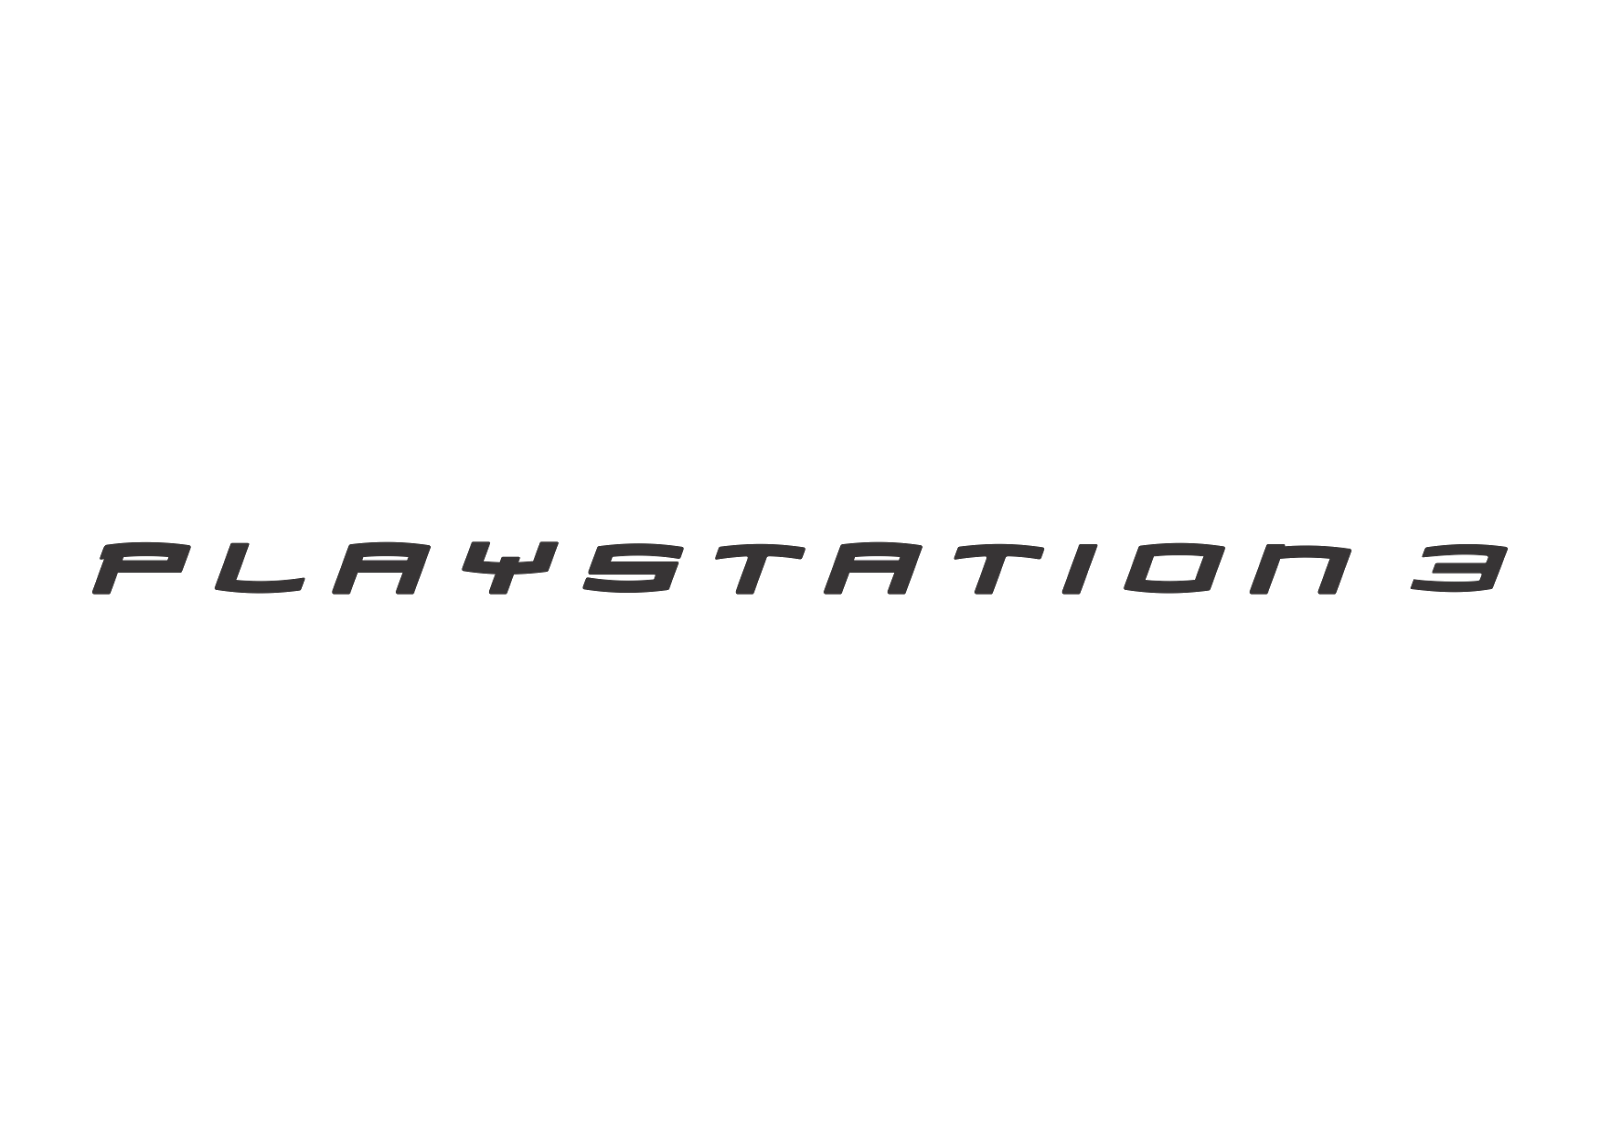 Sony PlayStation Clip Art Transparent PNG